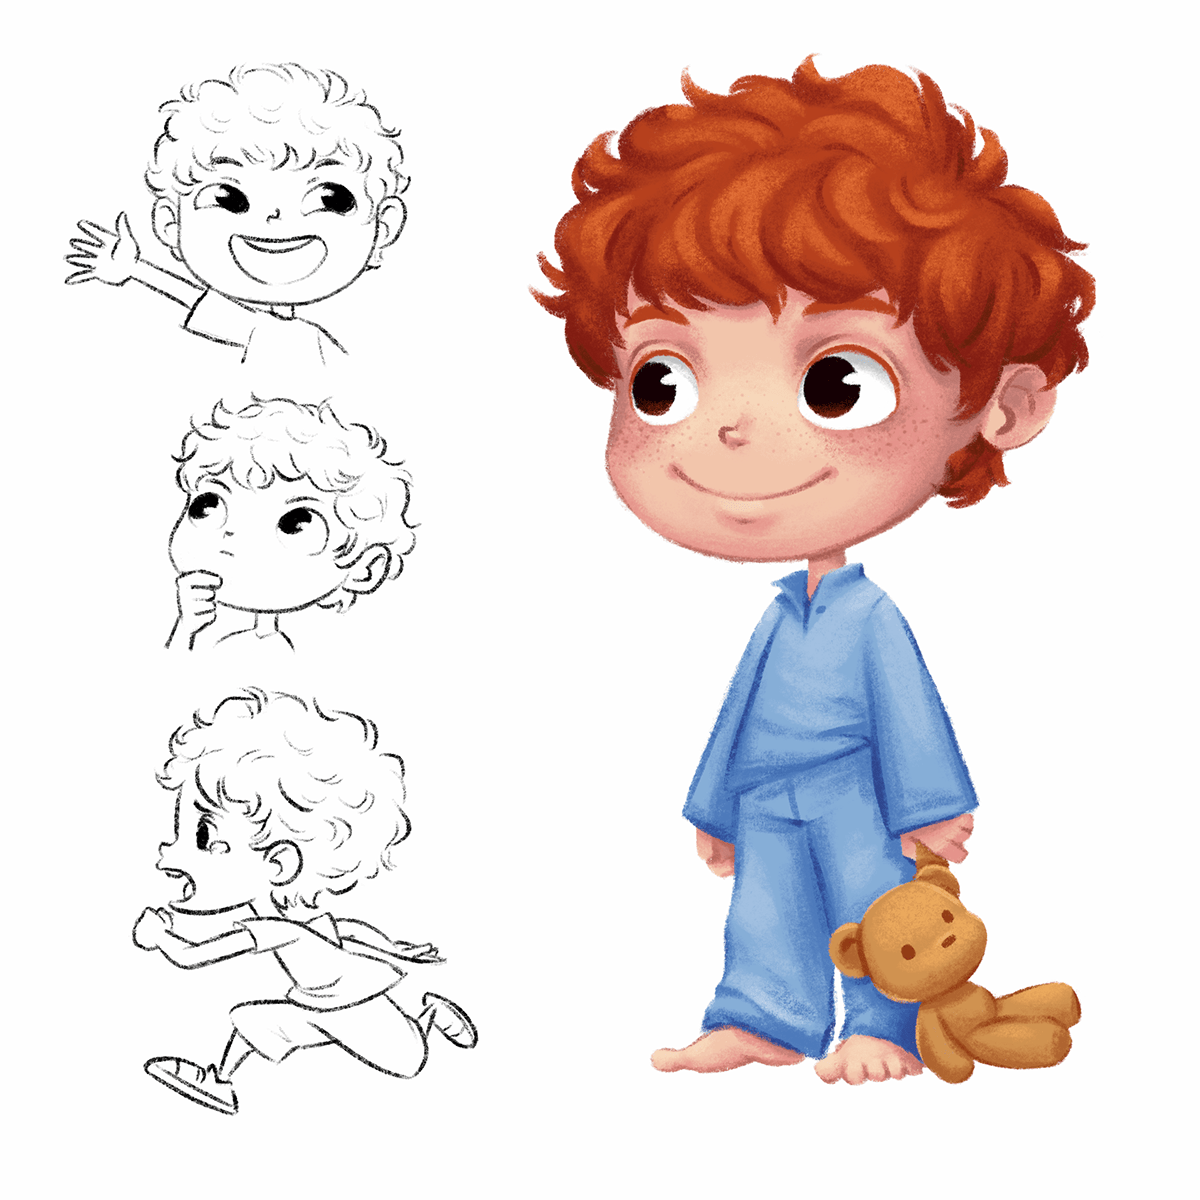 Character design of the red-haired child wearing blue pijamas, in many poses: in doubt, happy and running scaried